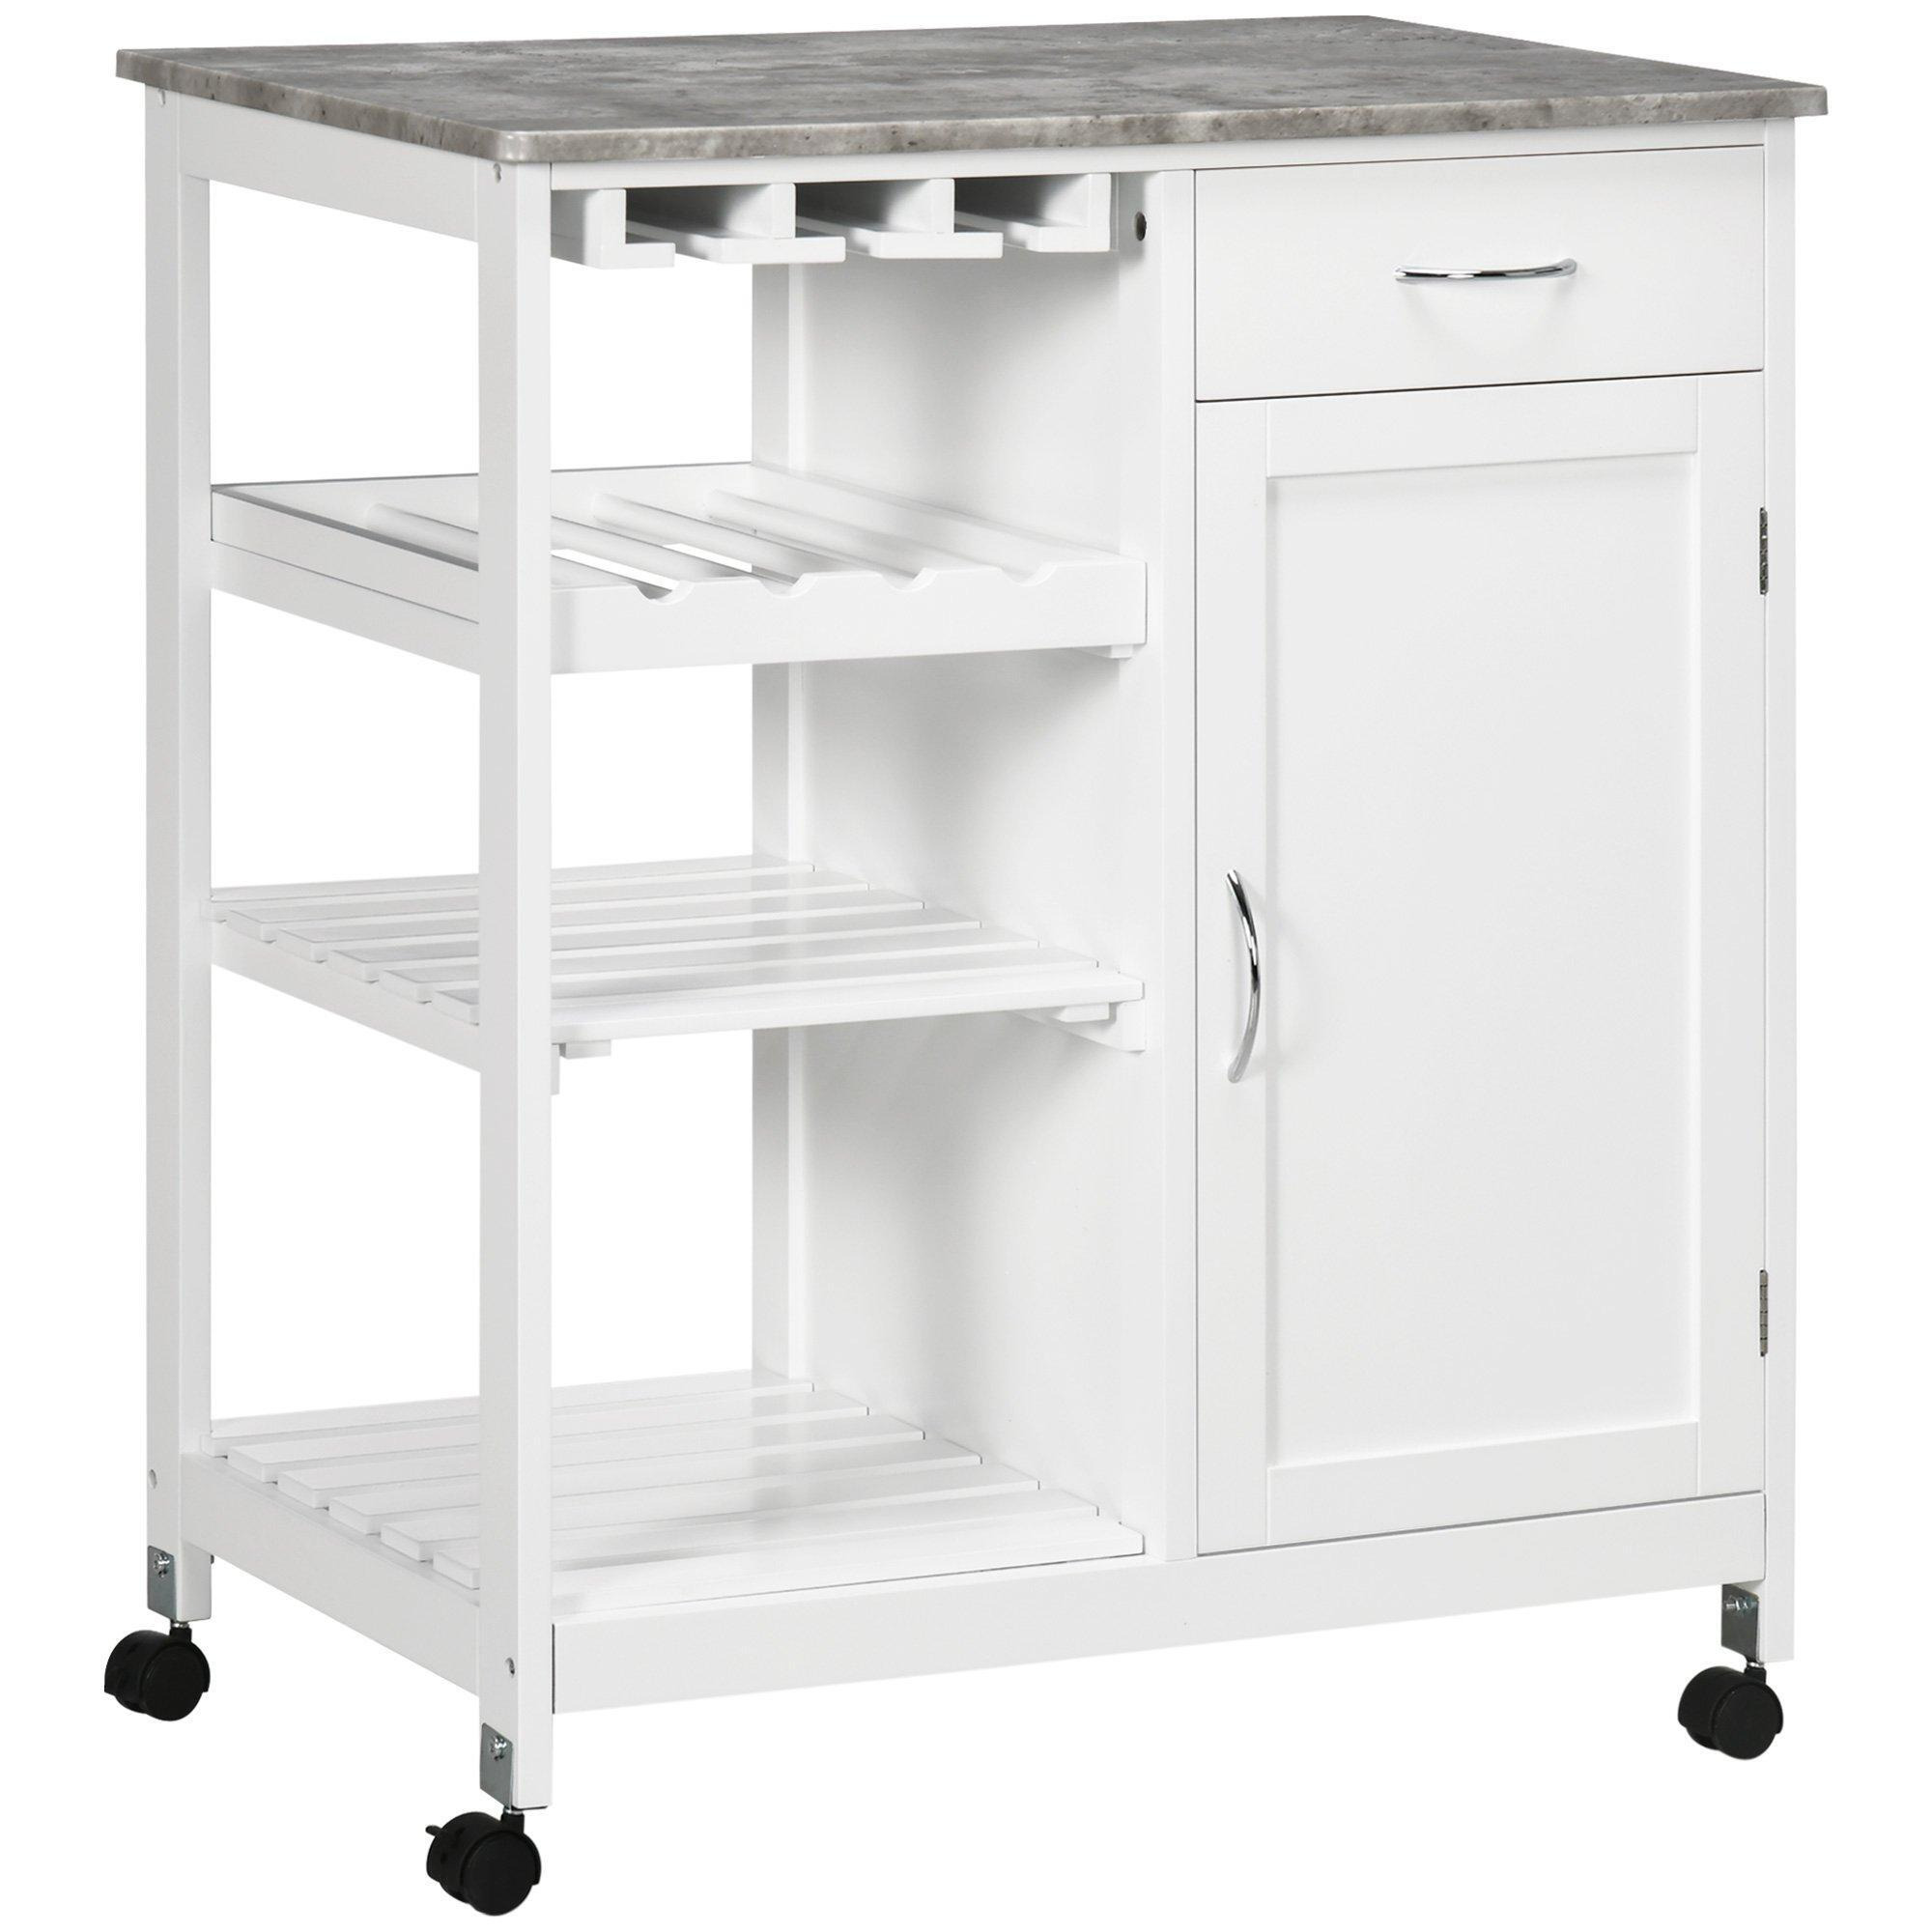 Compact Kitchen Trolley Utility Cart   Wheel Wine Rack Cabinet - image 1